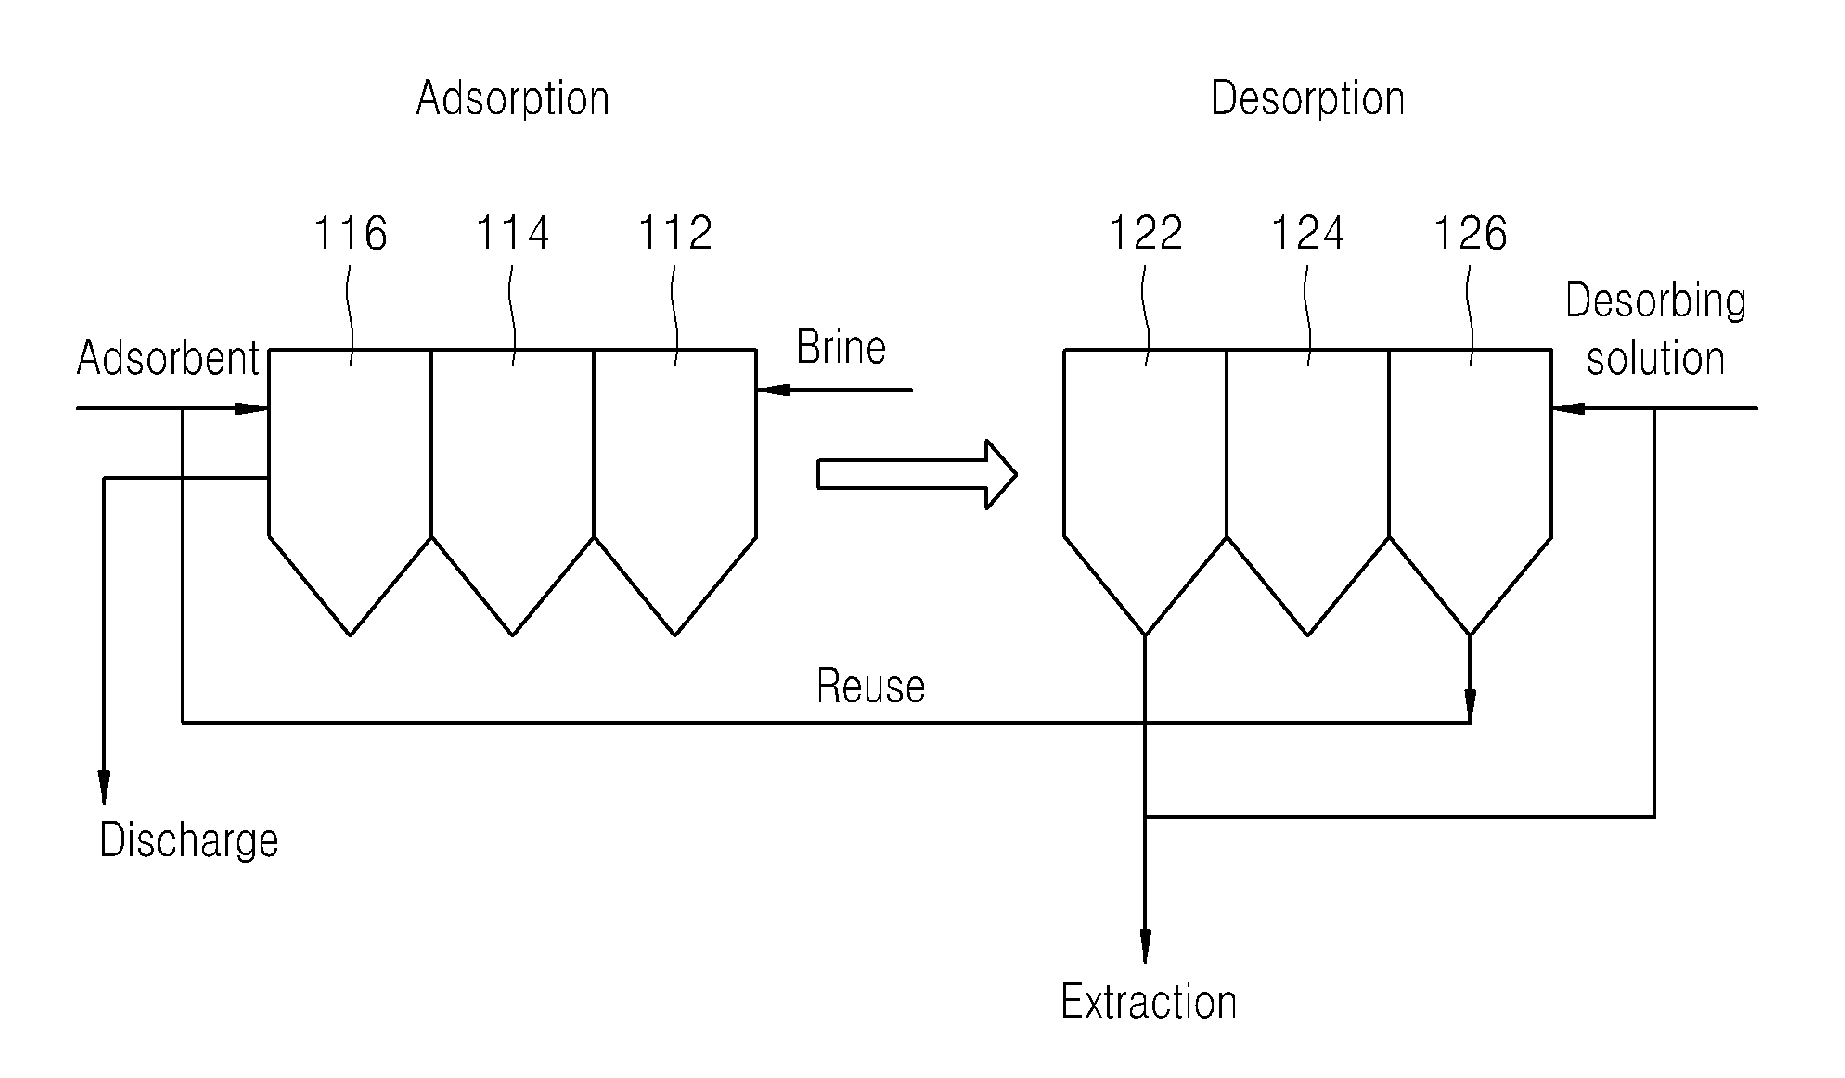 Apparatus and method for adsorbing and desorbing lithium ions using a ccd process